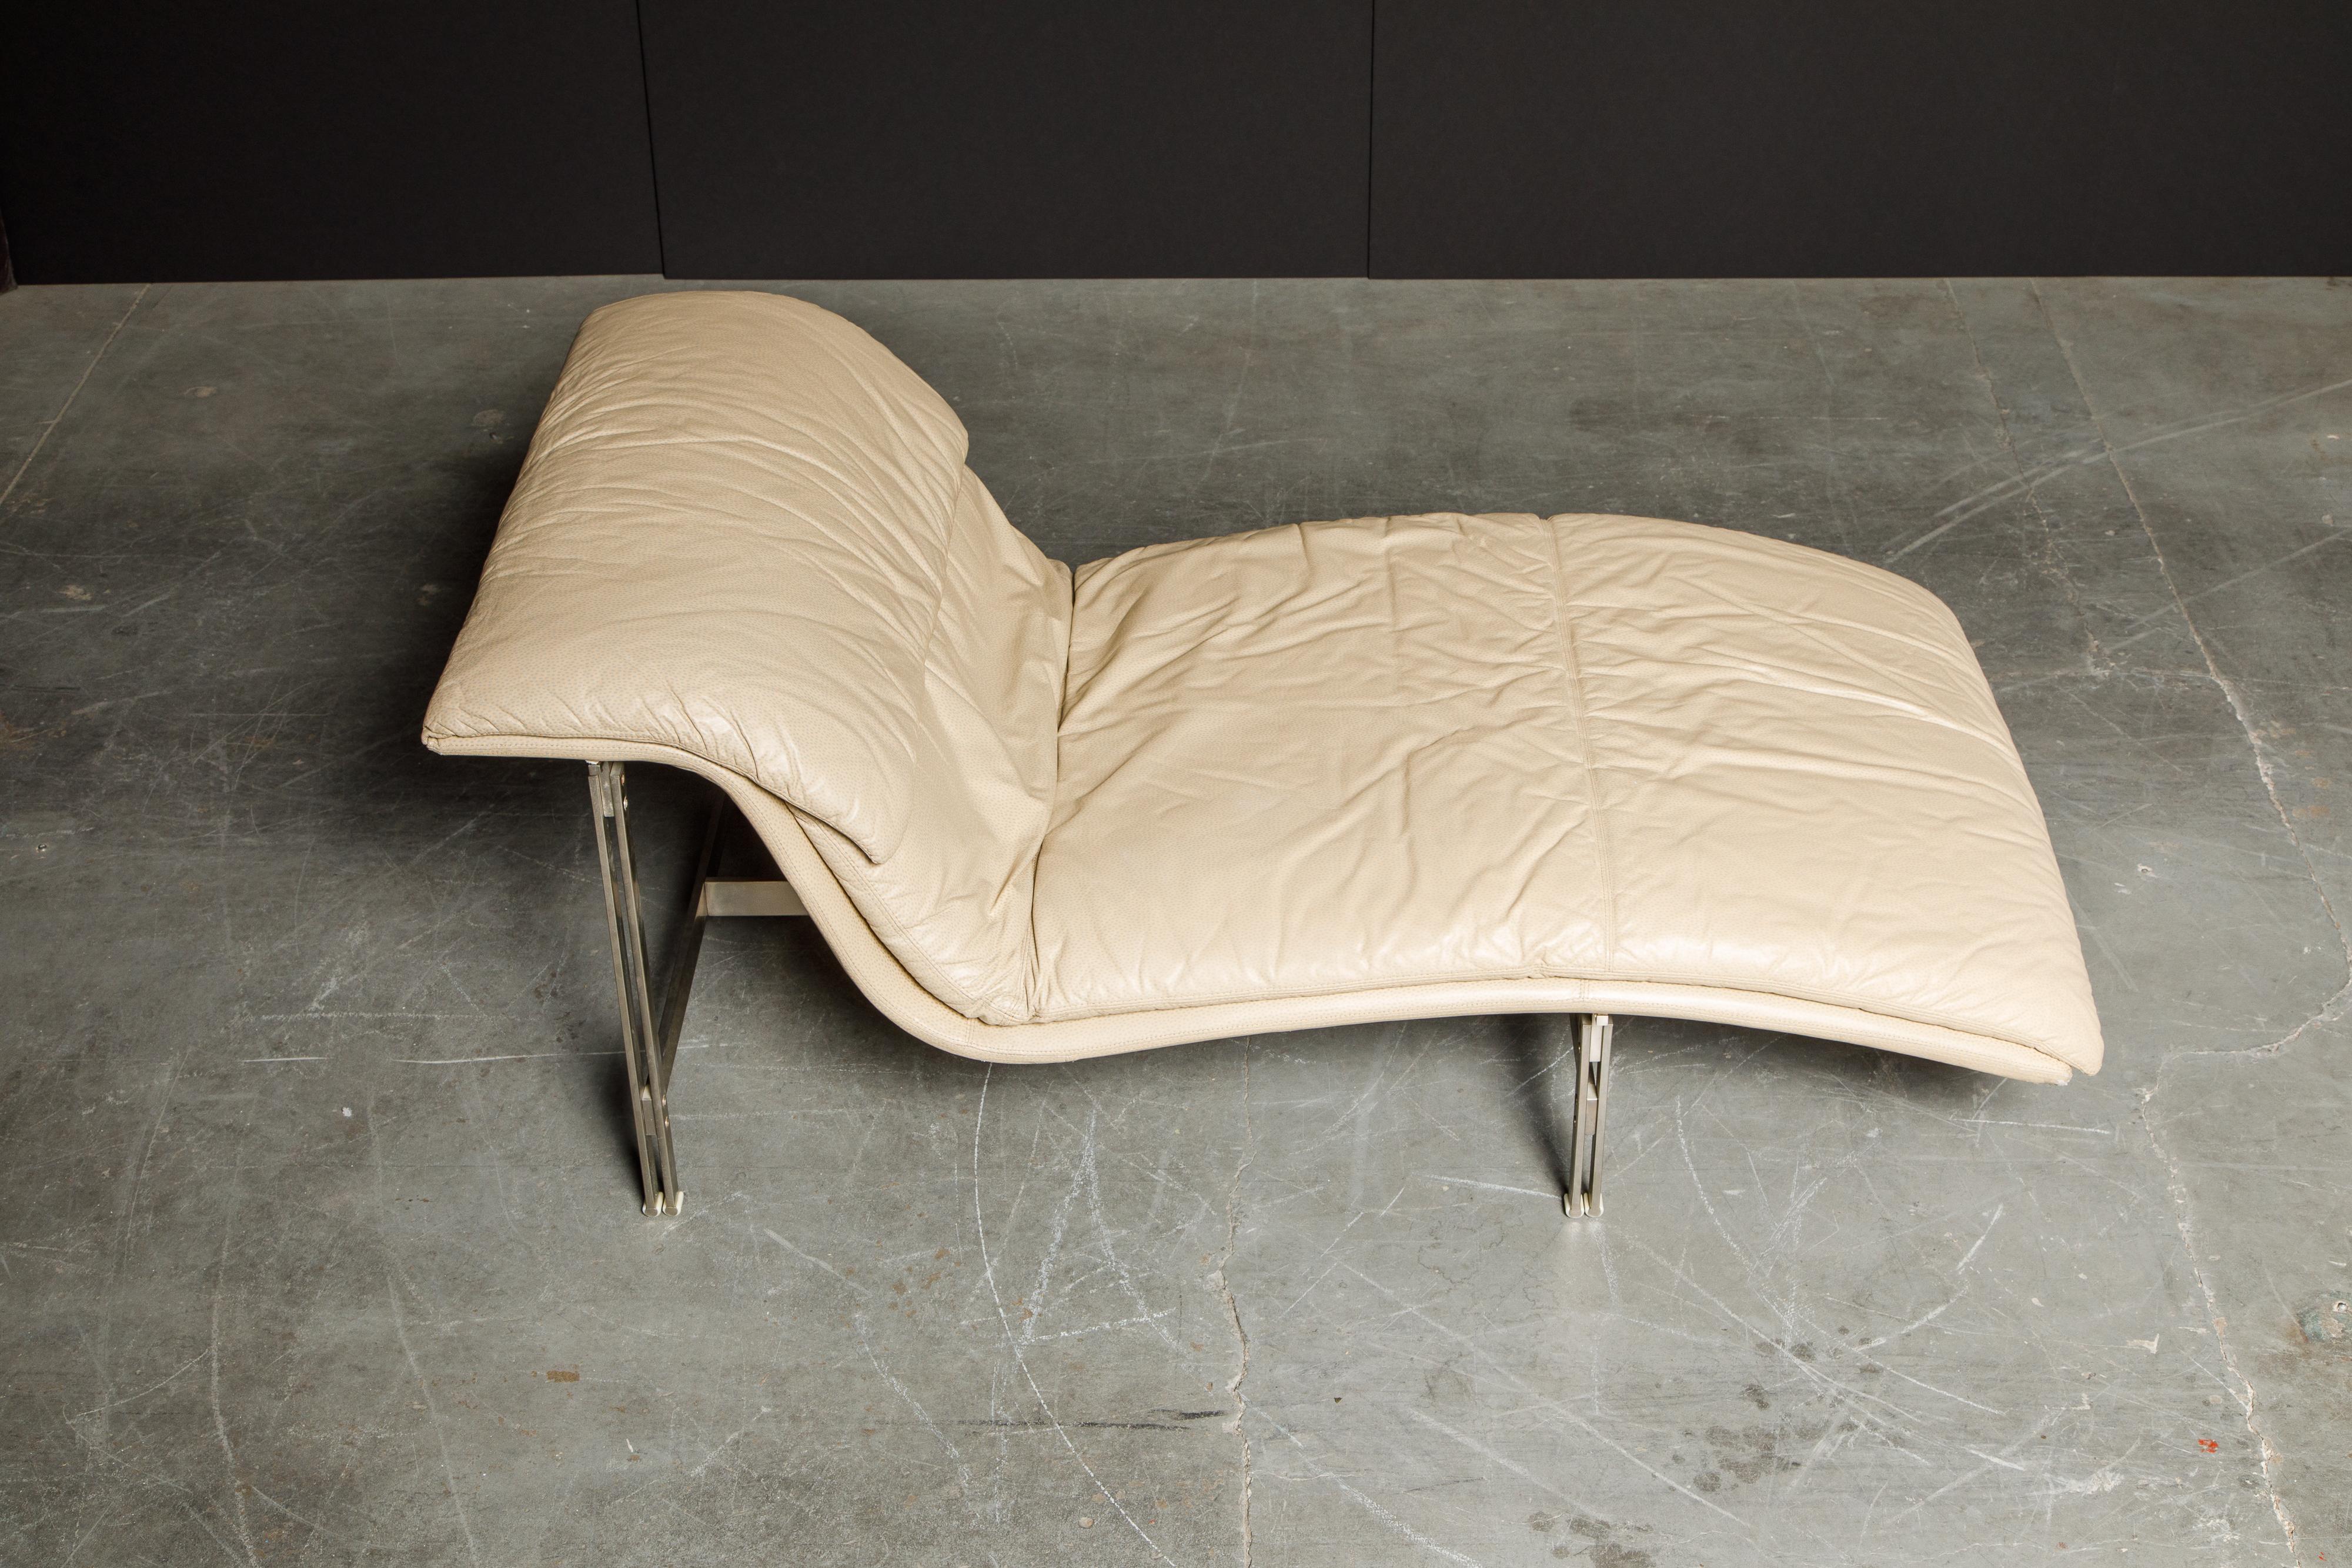 Modern Leather 'Wave' Chaise by Giovanni Offredi for Saporiti Italia, c. 1978, Signed